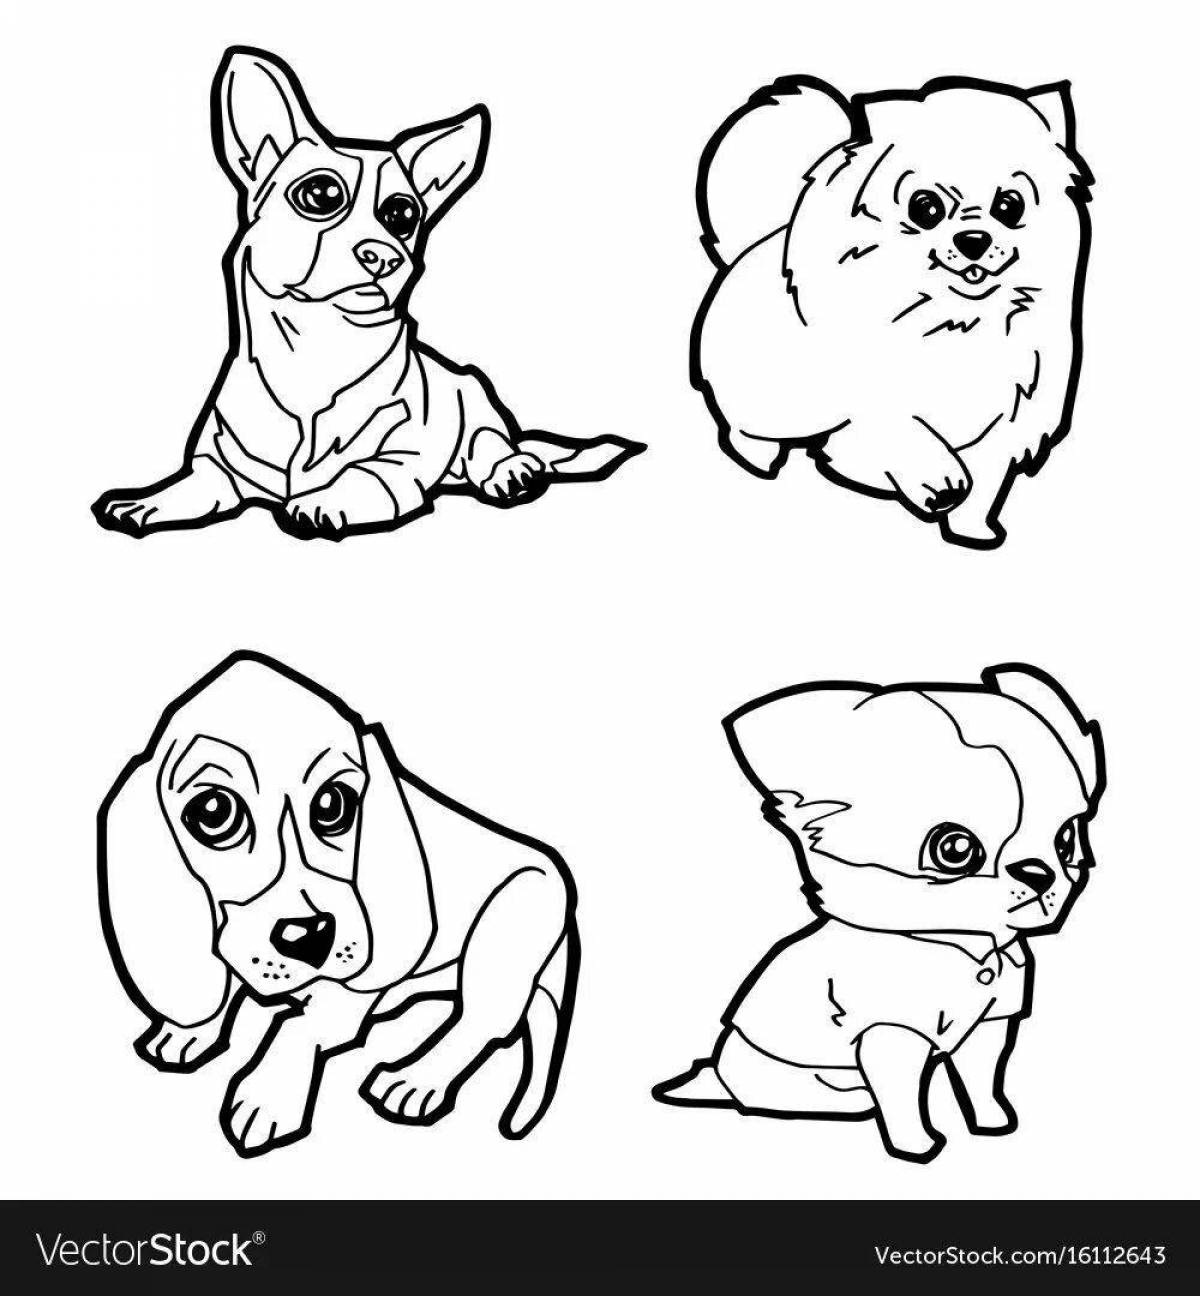 Cute little puppy coloring book